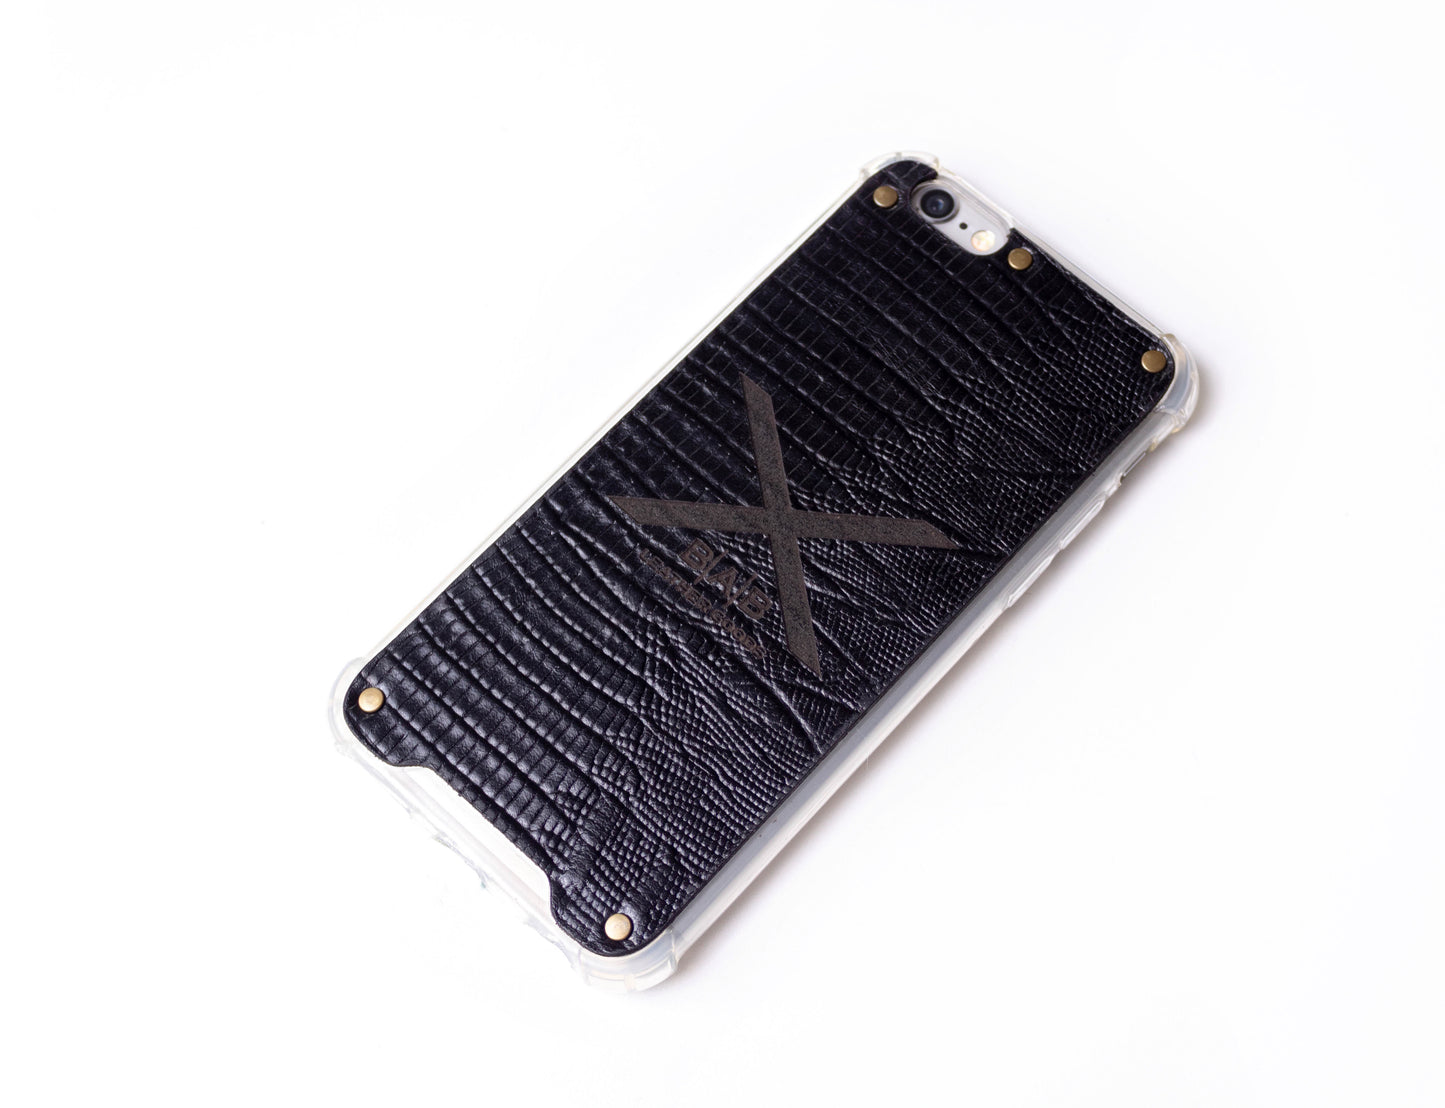 Textured Black Lizard Patent Genuine Leather iPhone Case cut and laser engraved, 5 Bronze Rivets.- F36